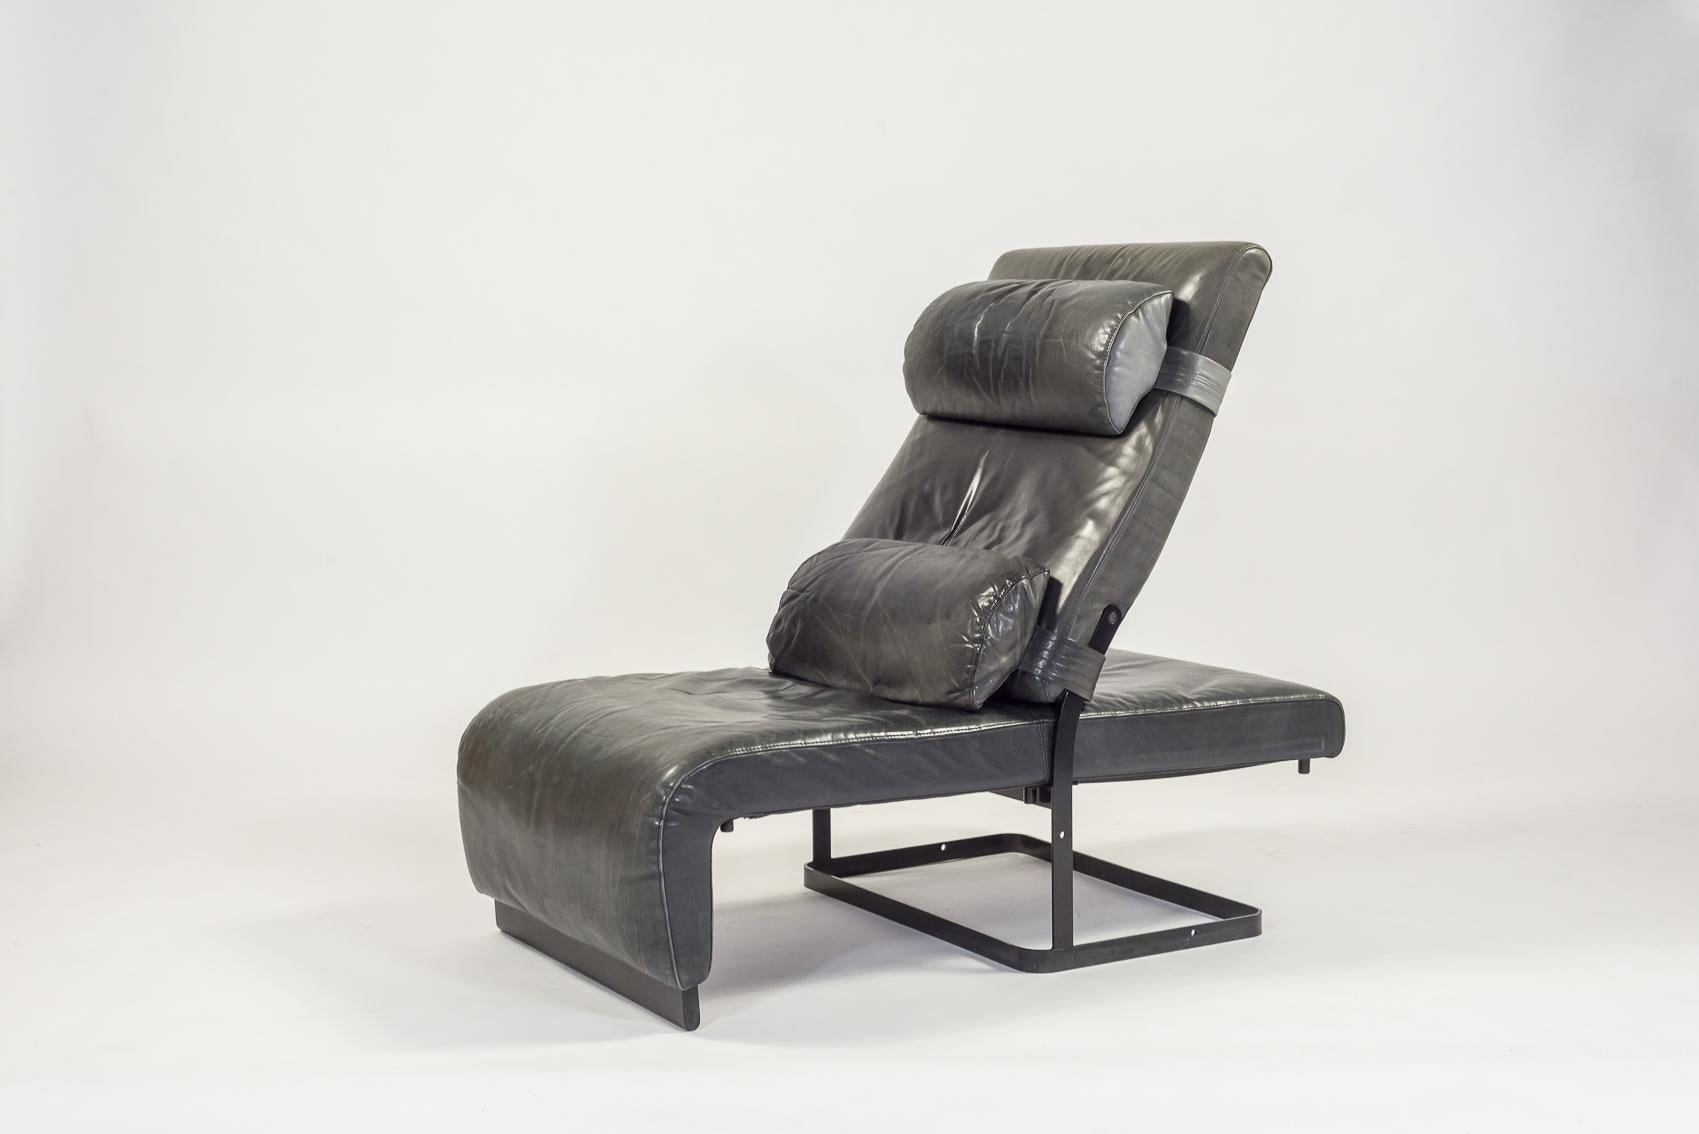 Lounge chair from 1970s in black leather. The sitting part can be adjusted/moved forwards and backwards in a few positions, from sitting to laying lounge position.
  